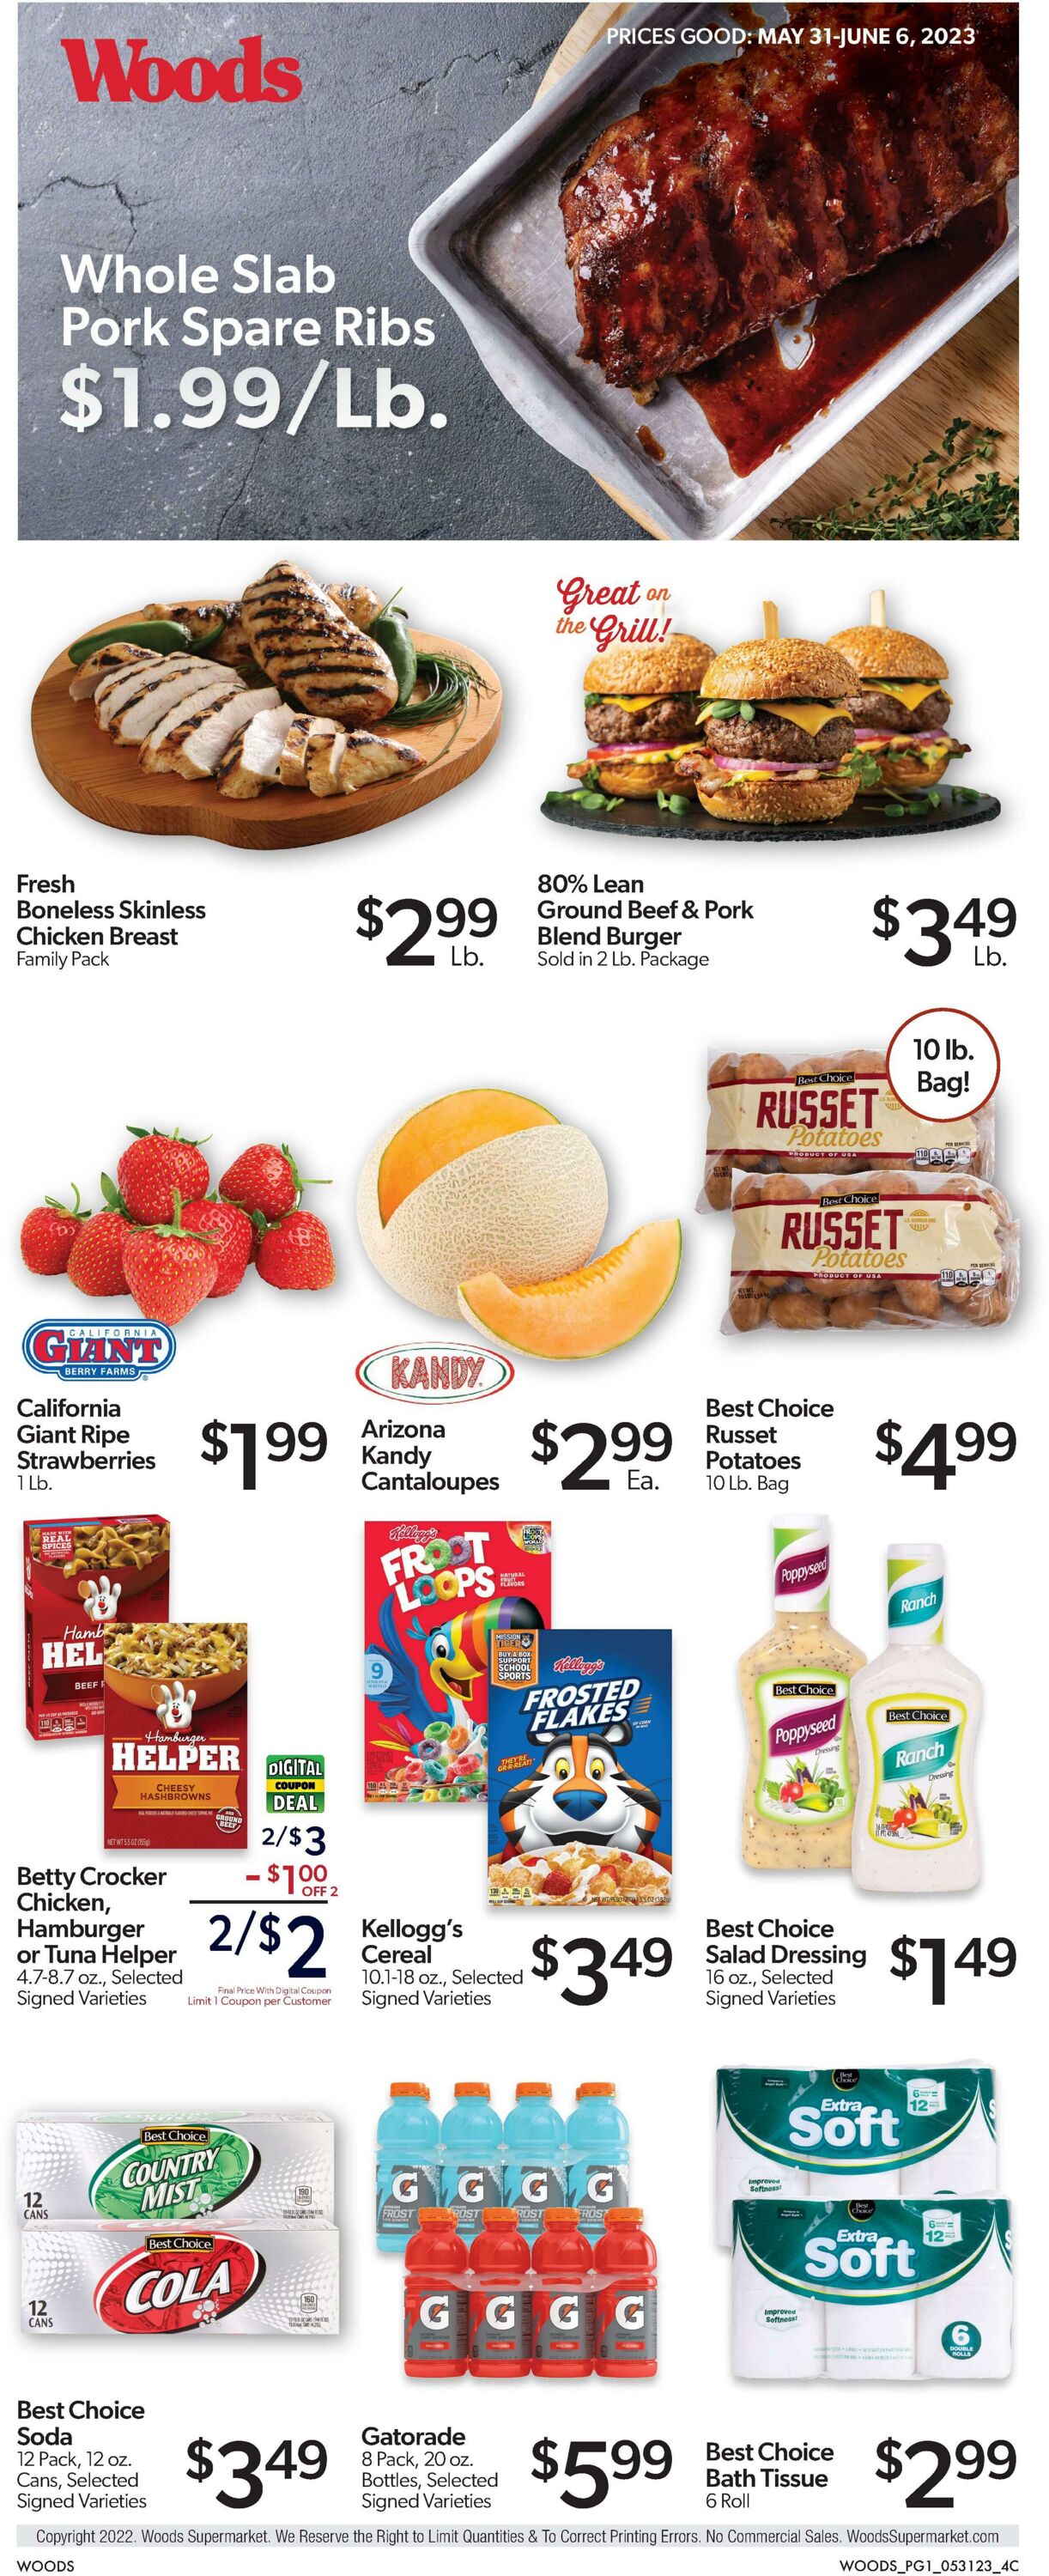 Woods Supermarket Promotional weekly ads